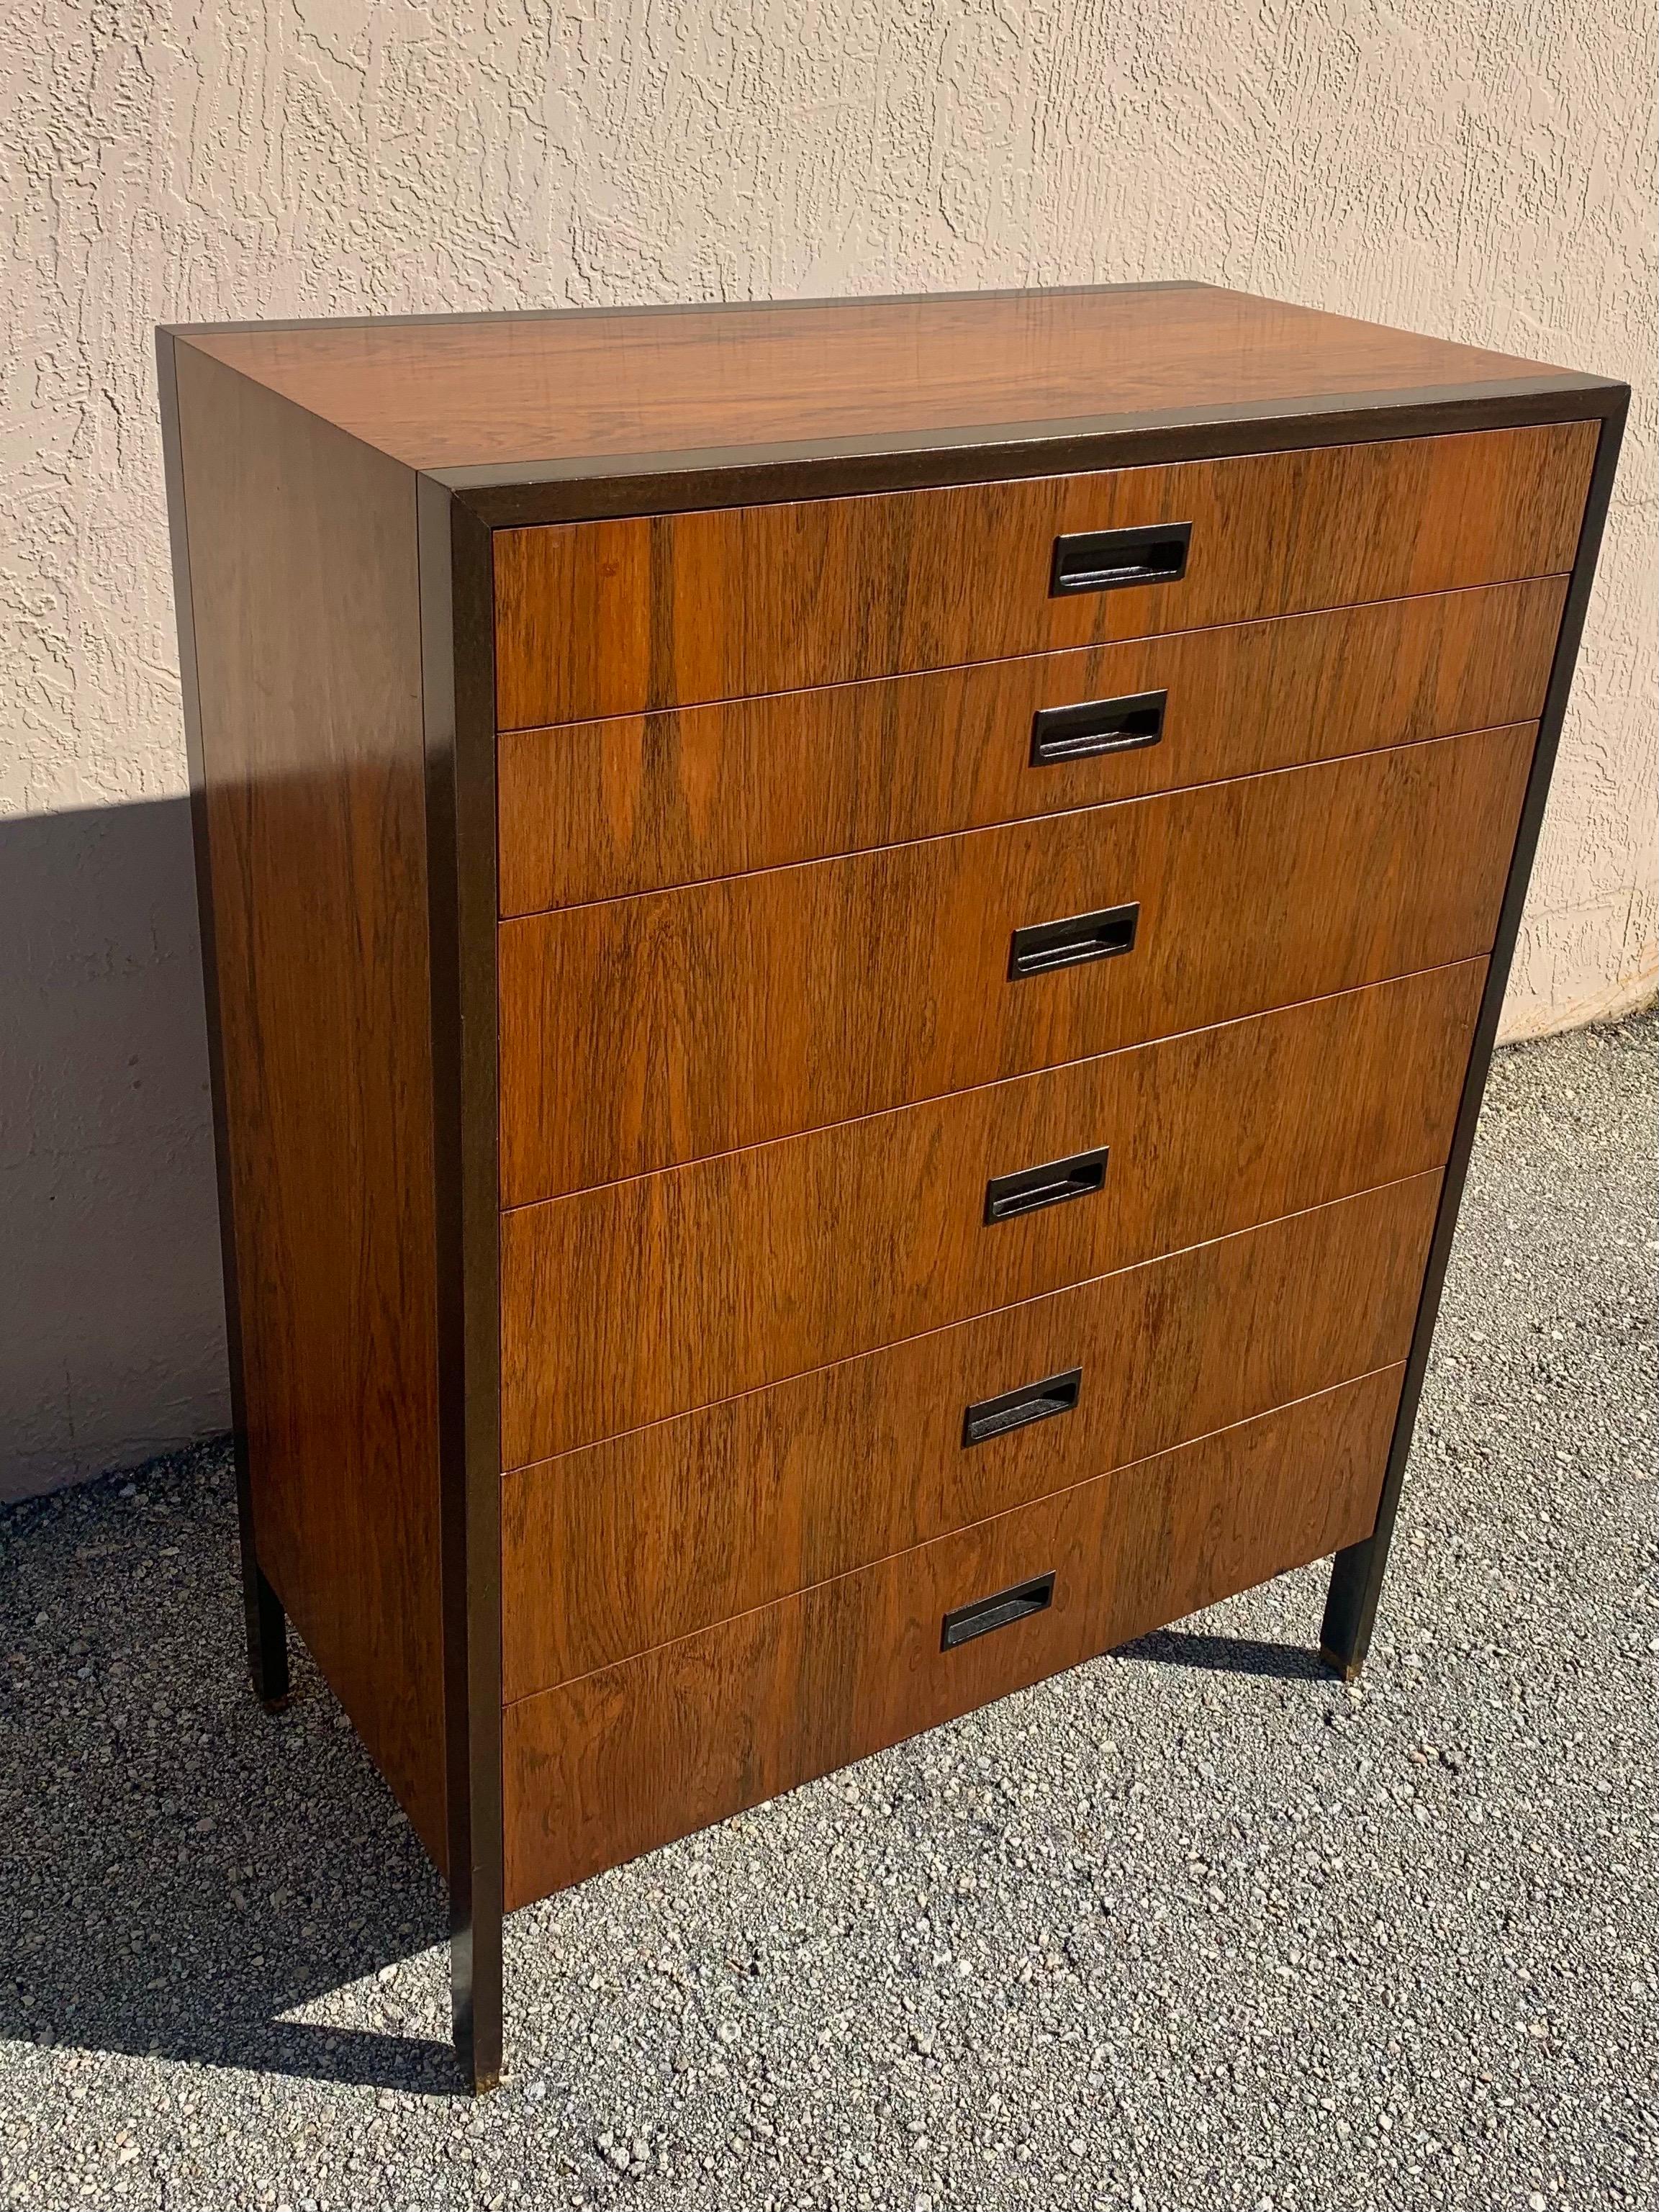 Exceptional Harvey Probber dresser in rosewood and ebonized mahogany trim and brass capped feet. Wood carved drawer pulls are embedded into the front of the drawers. Ample drawer space. Original finish is in good condition with light patina. Harvey